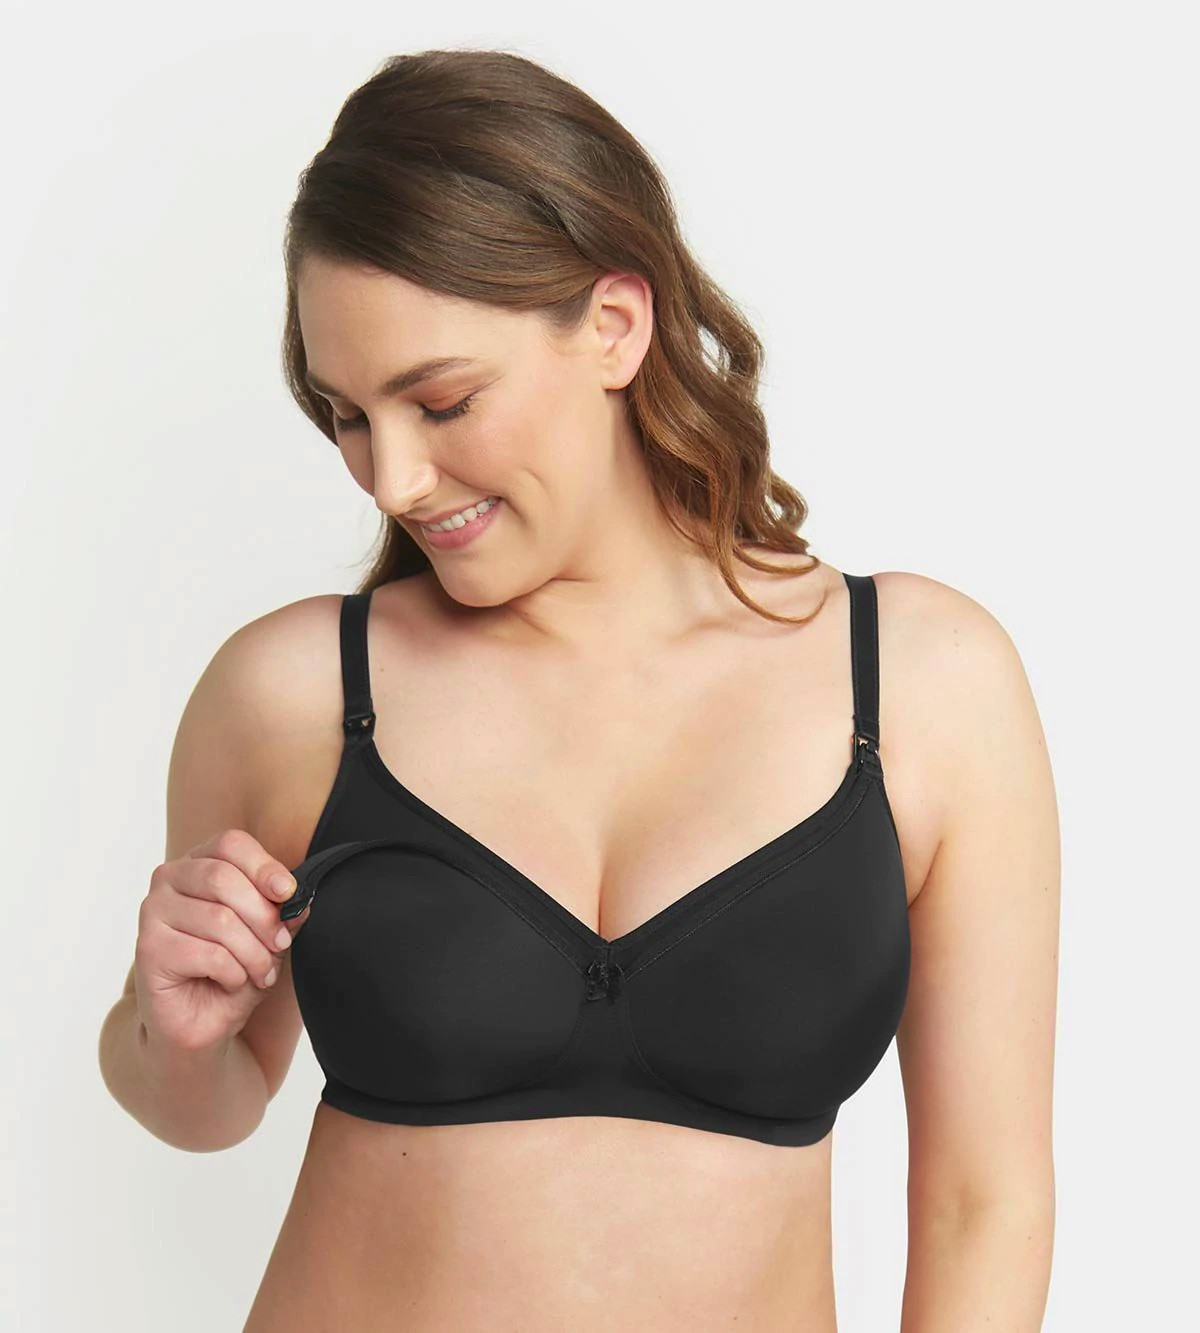 Invisi Wirefree Bra by Bonds Online, THE ICONIC